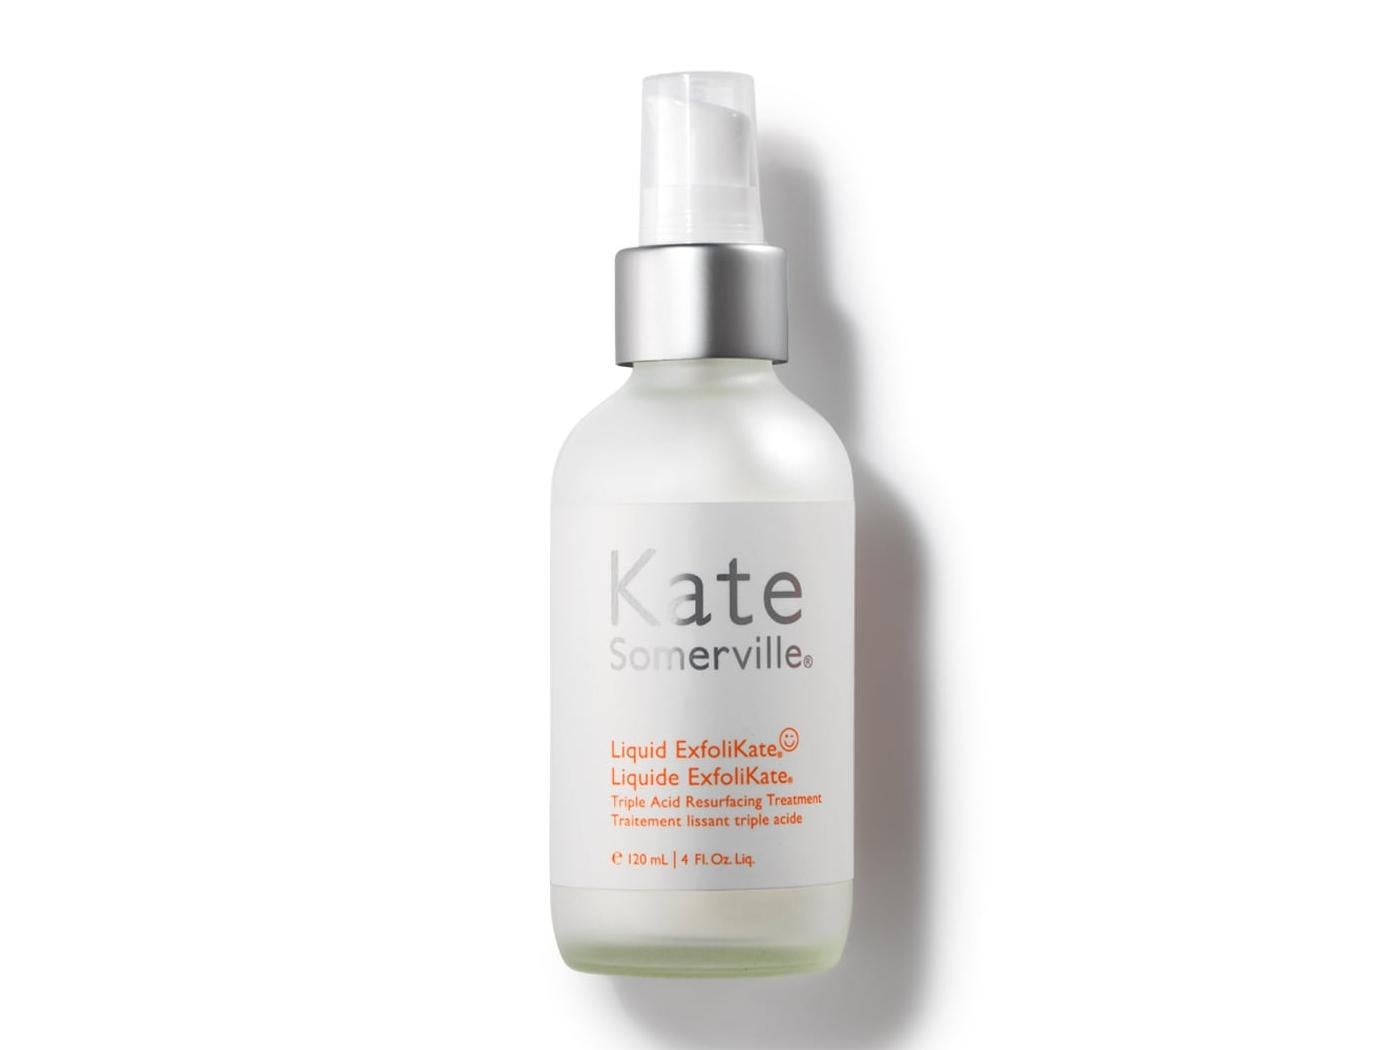 Enriched with antibacterial honey and vitamin E, this AHA exfoliant is the perfect nighttime treat (Kate Somerville)